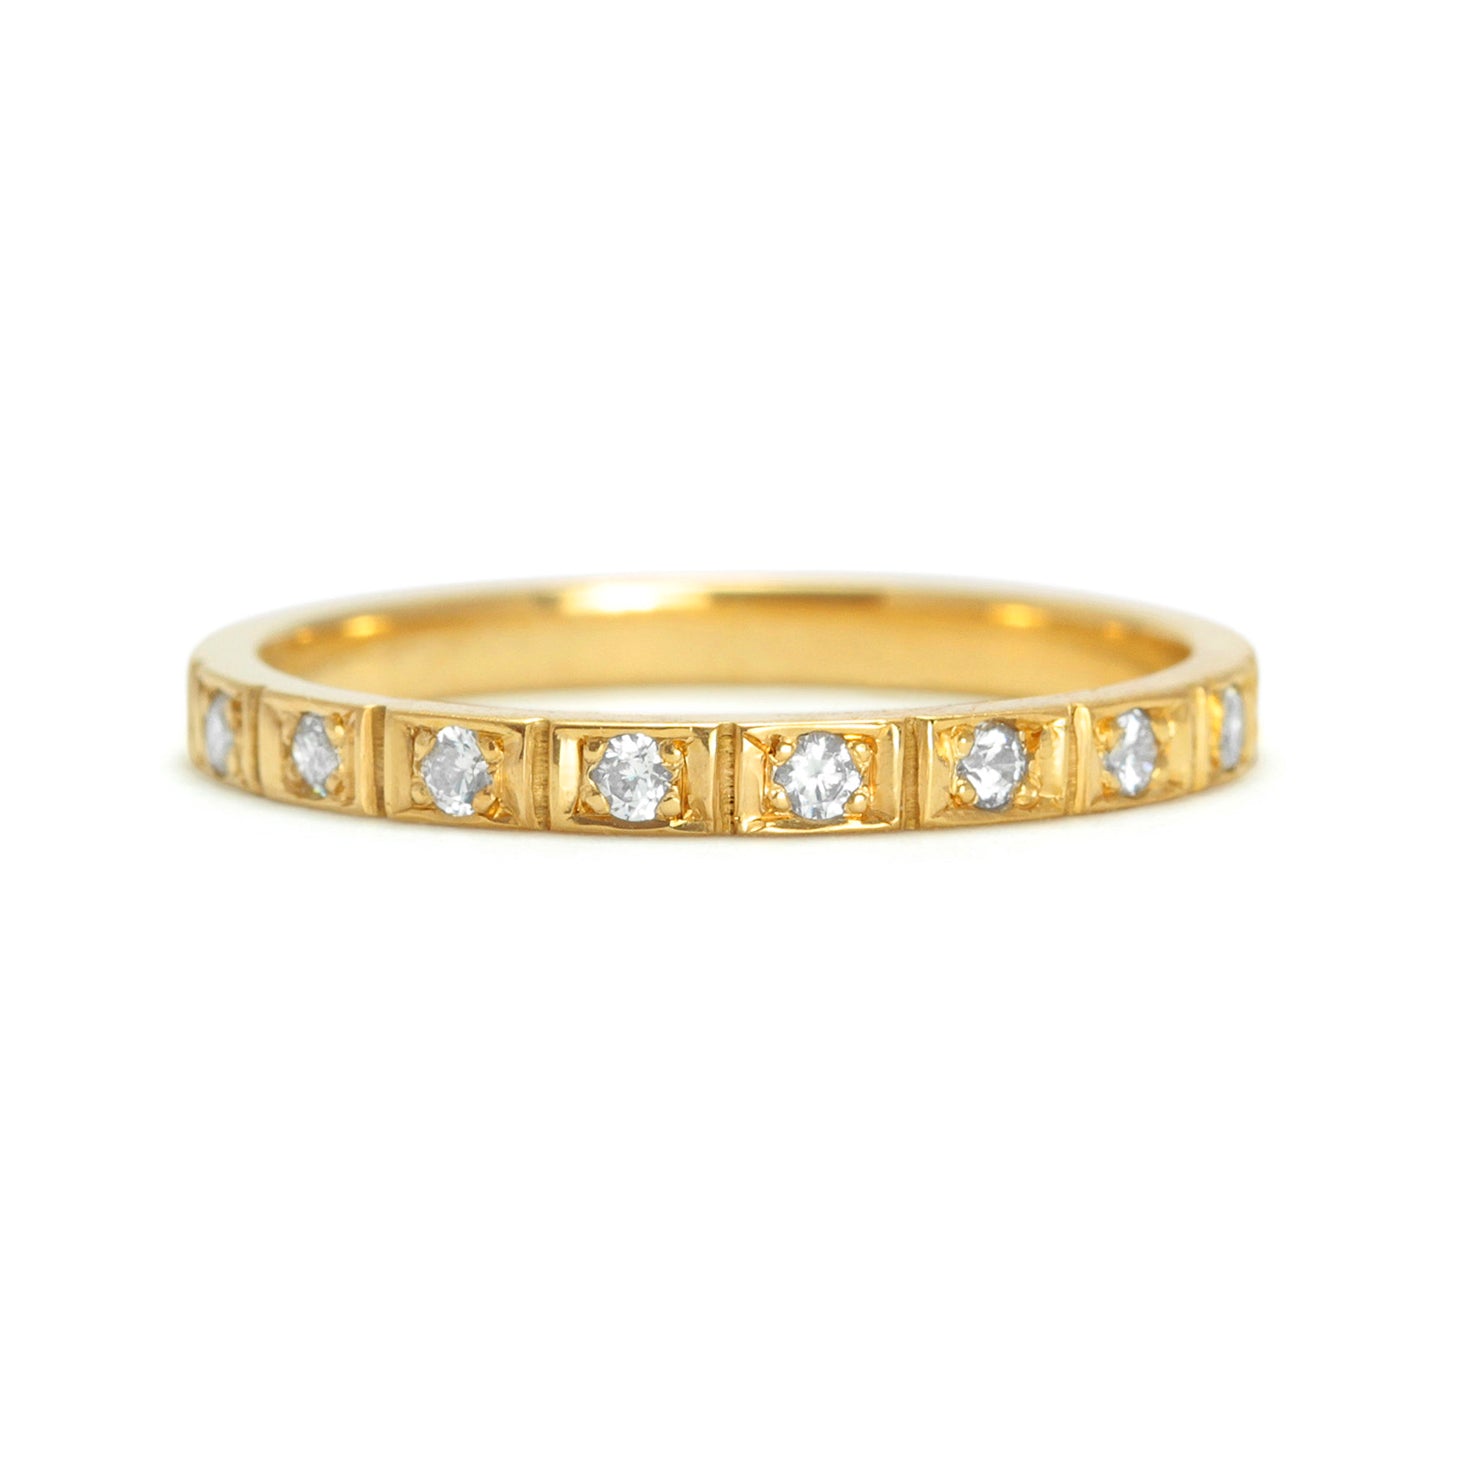 Liberty Diamond Ethical Gold Wedding Ring, 18ct recycled yellow gold and conflict-free Canadian diamonds